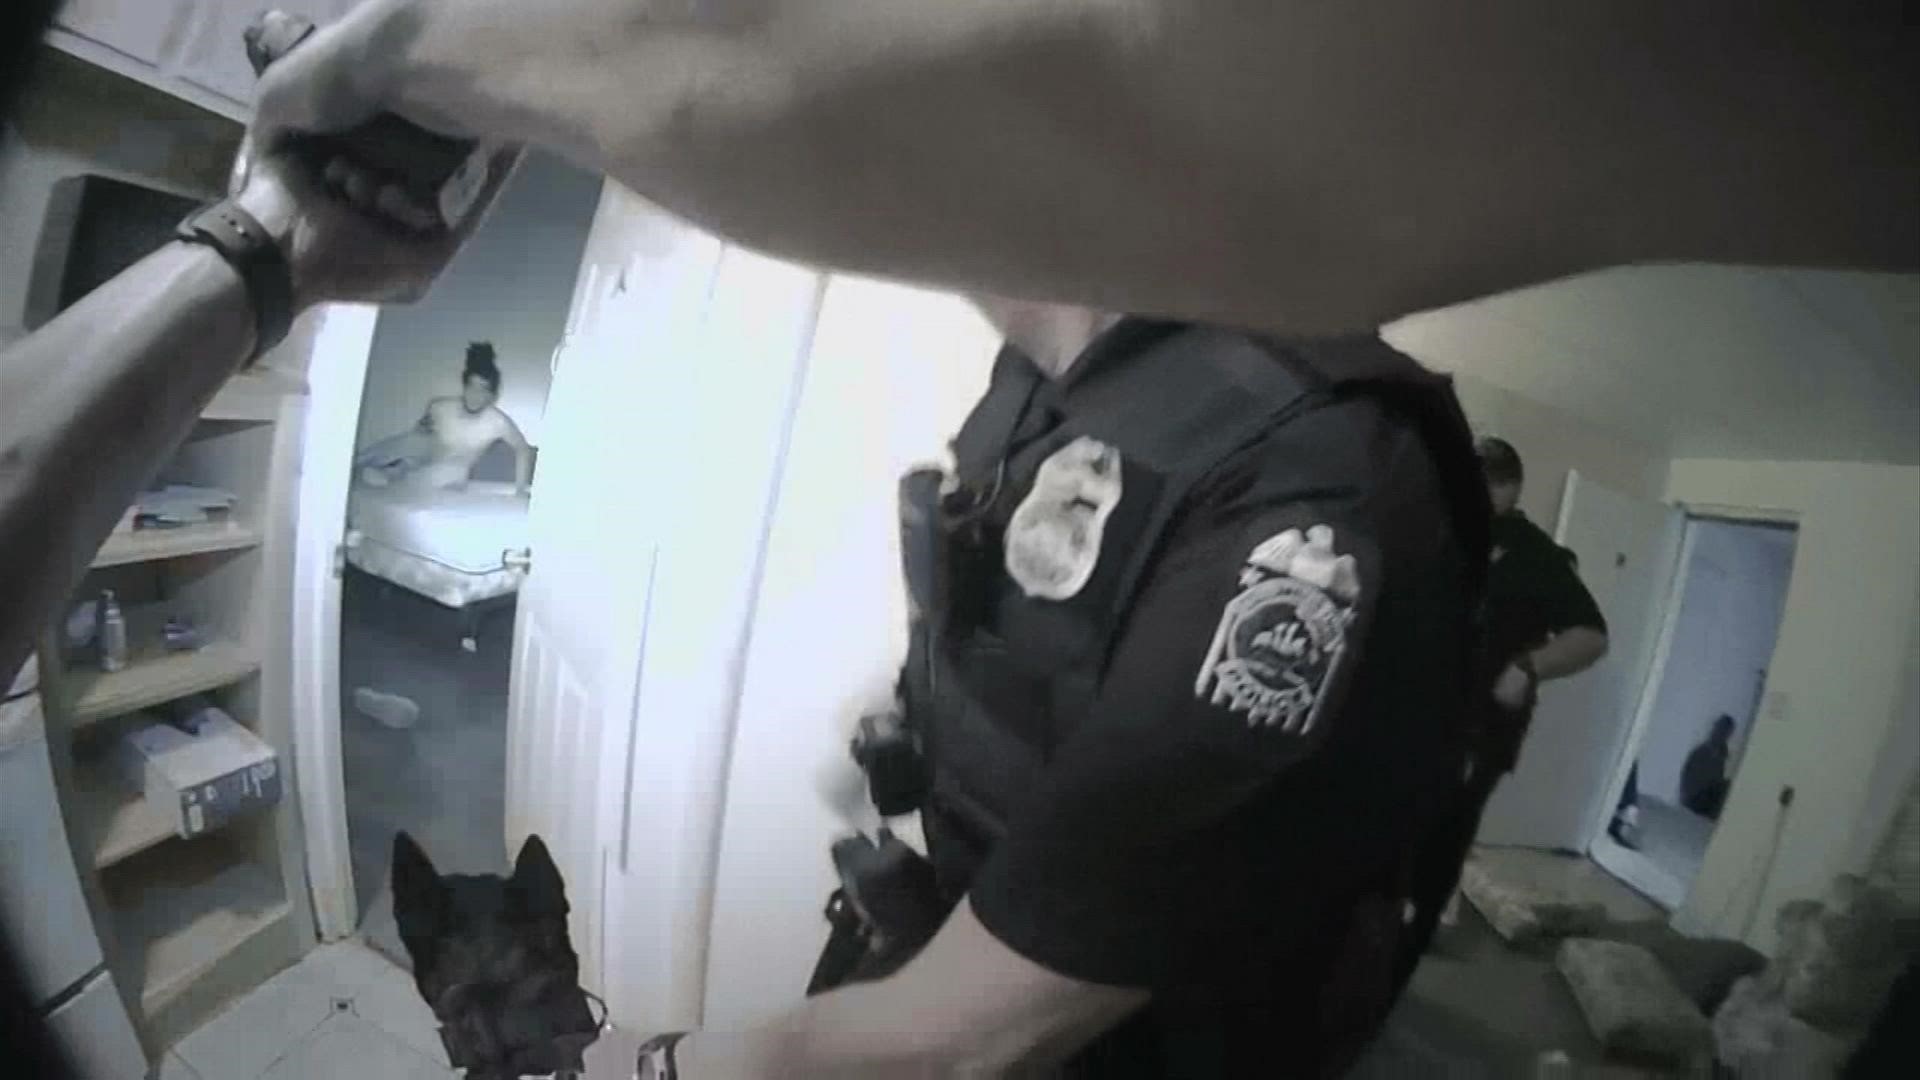 The Columbus Division of Police released body camera video of three shootings involving officers on Tuesday, one of which was deadly.